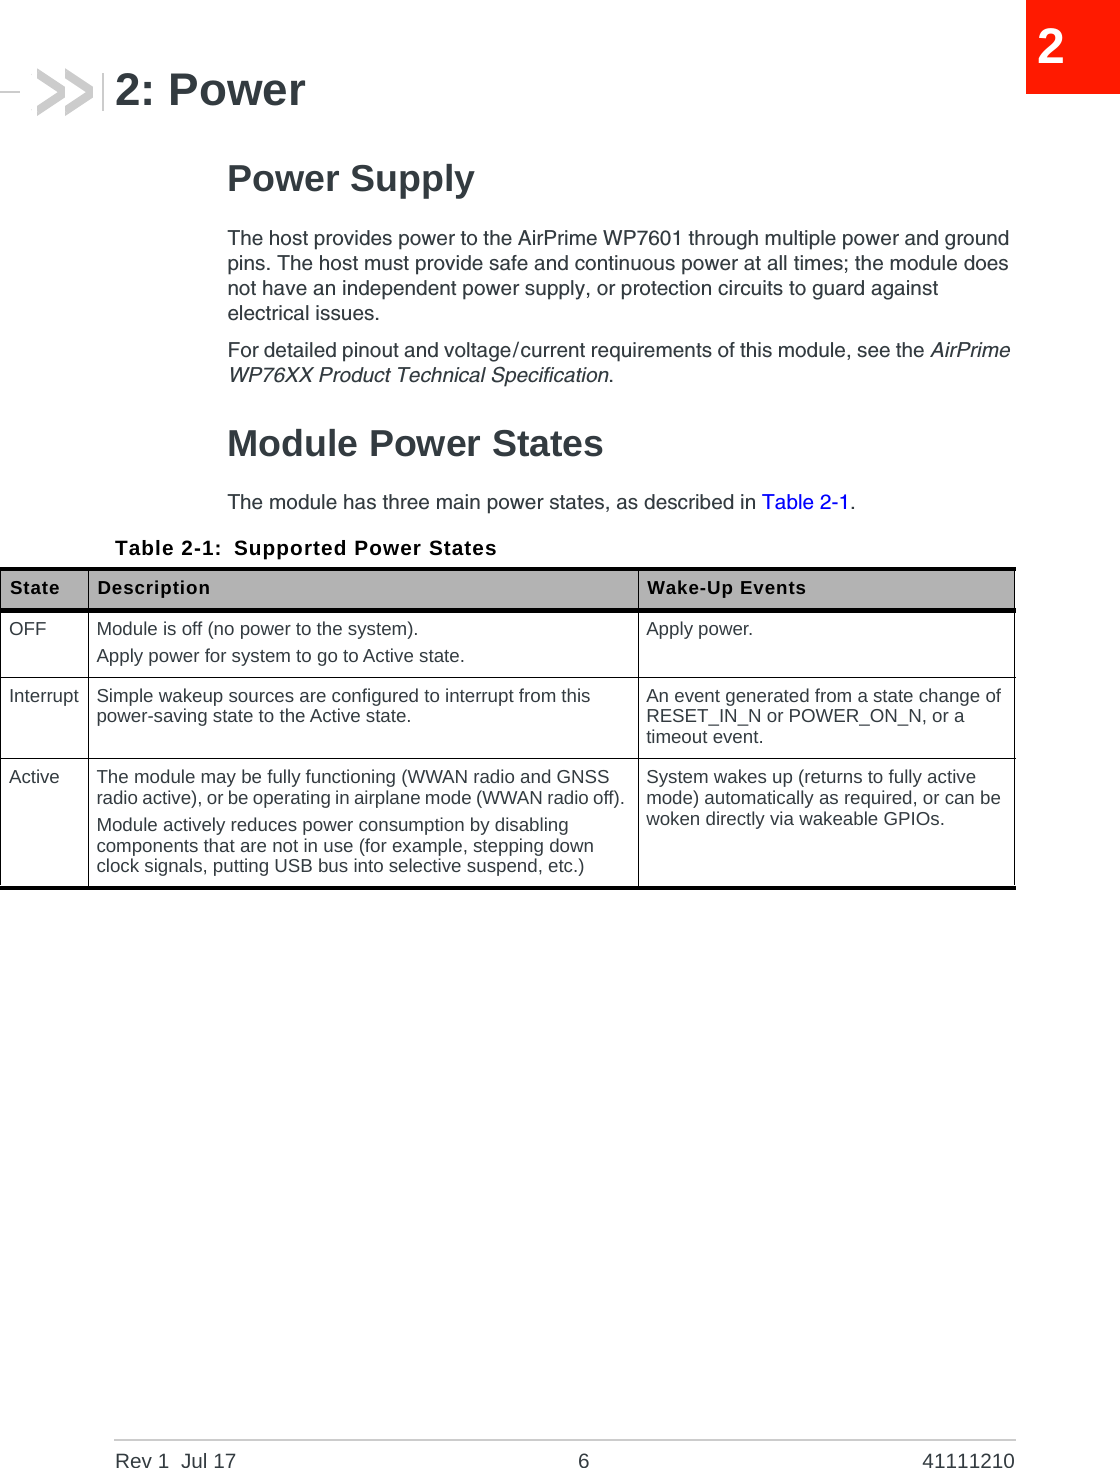 Rev 1  Jul 17 6 4111121022: PowerPower SupplyThe host provides power to the AirPrime WP7601 through multiple power and ground pins. The host must provide safe and continuous power at all times; the module does not have an independent power supply, or protection circuits to guard against electrical issues.For detailed pinout and voltage/current requirements of this module, see the AirPrime WP76XX Product Technical Specification.Module Power StatesThe module has three main power states, as described in Table 2-1.Table 2-1: Supported Power StatesState Description Wake-Up EventsOFF Module is off (no power to the system).Apply power for system to go to Active state.Apply power.Interrupt Simple wakeup sources are configured to interrupt from this power-saving state to the Active state. An event generated from a state change of RESET_IN_N or POWER_ON_N, or a timeout event.Active The module may be fully functioning (WWAN radio and GNSS radio active), or be operating in airplane mode (WWAN radio off). Module actively reduces power consumption by disabling components that are not in use (for example, stepping down clock signals, putting USB bus into selective suspend, etc.)System wakes up (returns to fully active mode) automatically as required, or can be woken directly via wakeable GPIOs. 